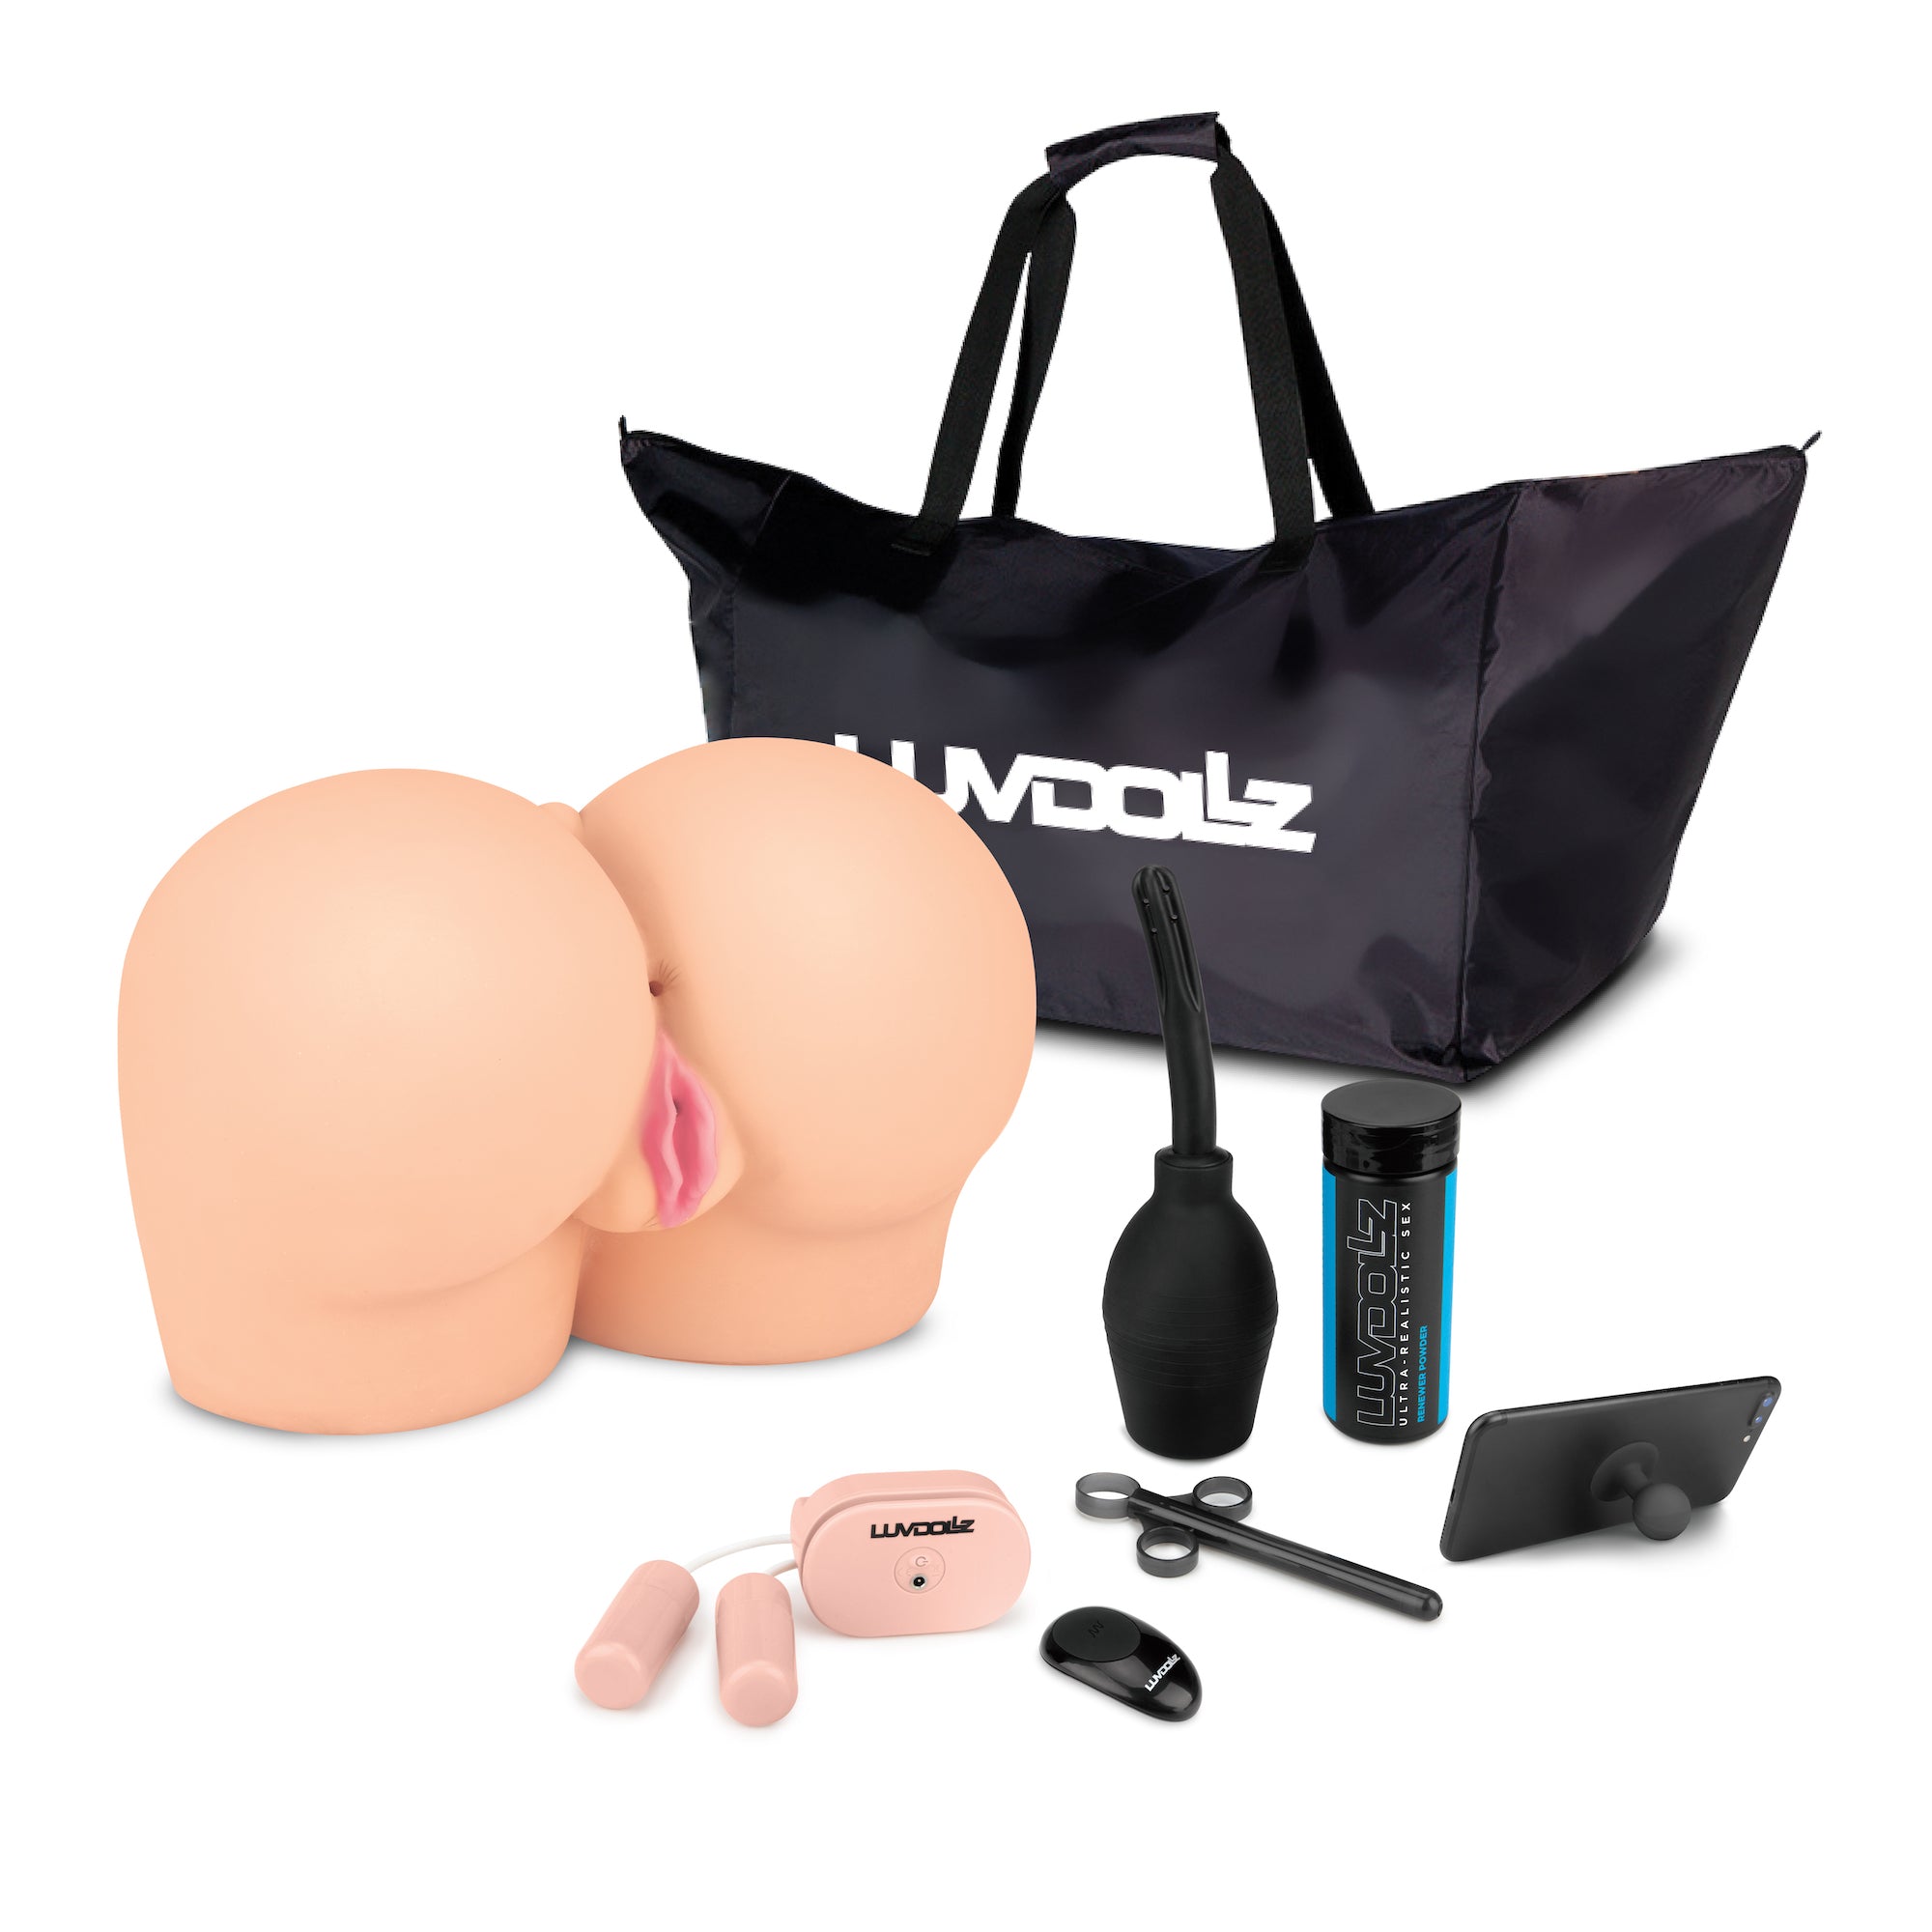 Doggy Style Sex Toy To Explore Your Backdoor Fantasies